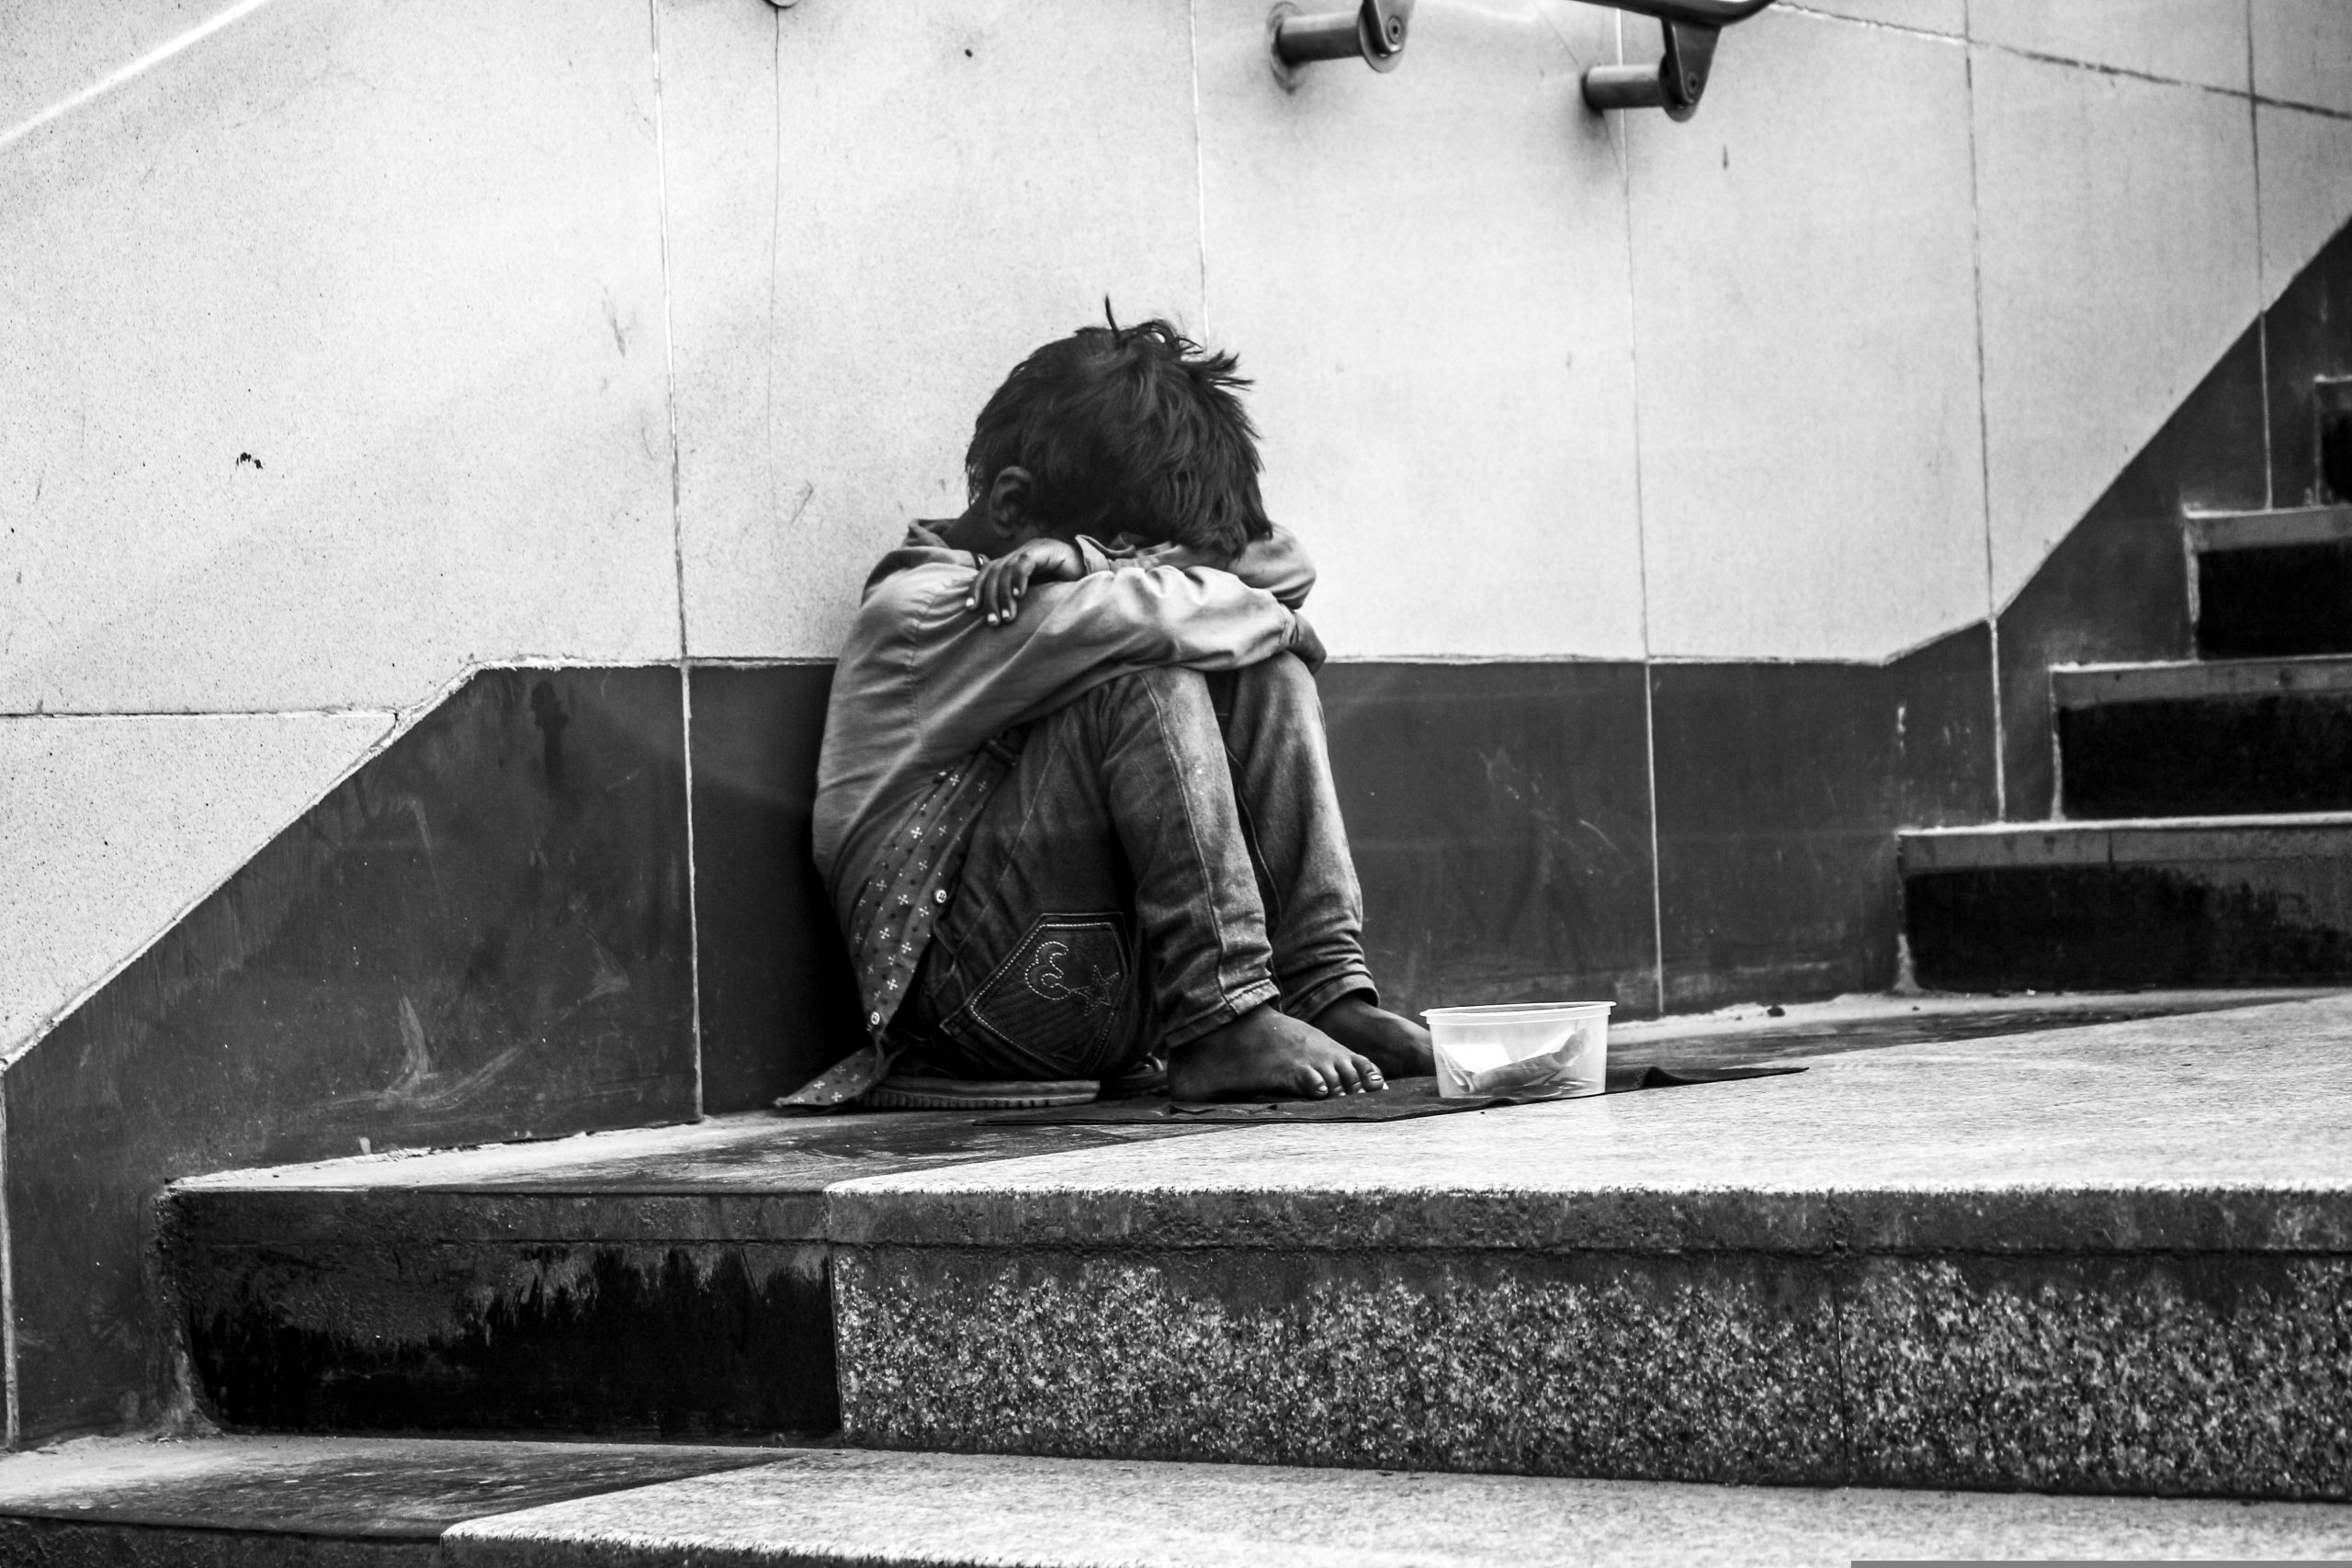 Spain has the worst child poverty record in the EU - but fares better than the UK